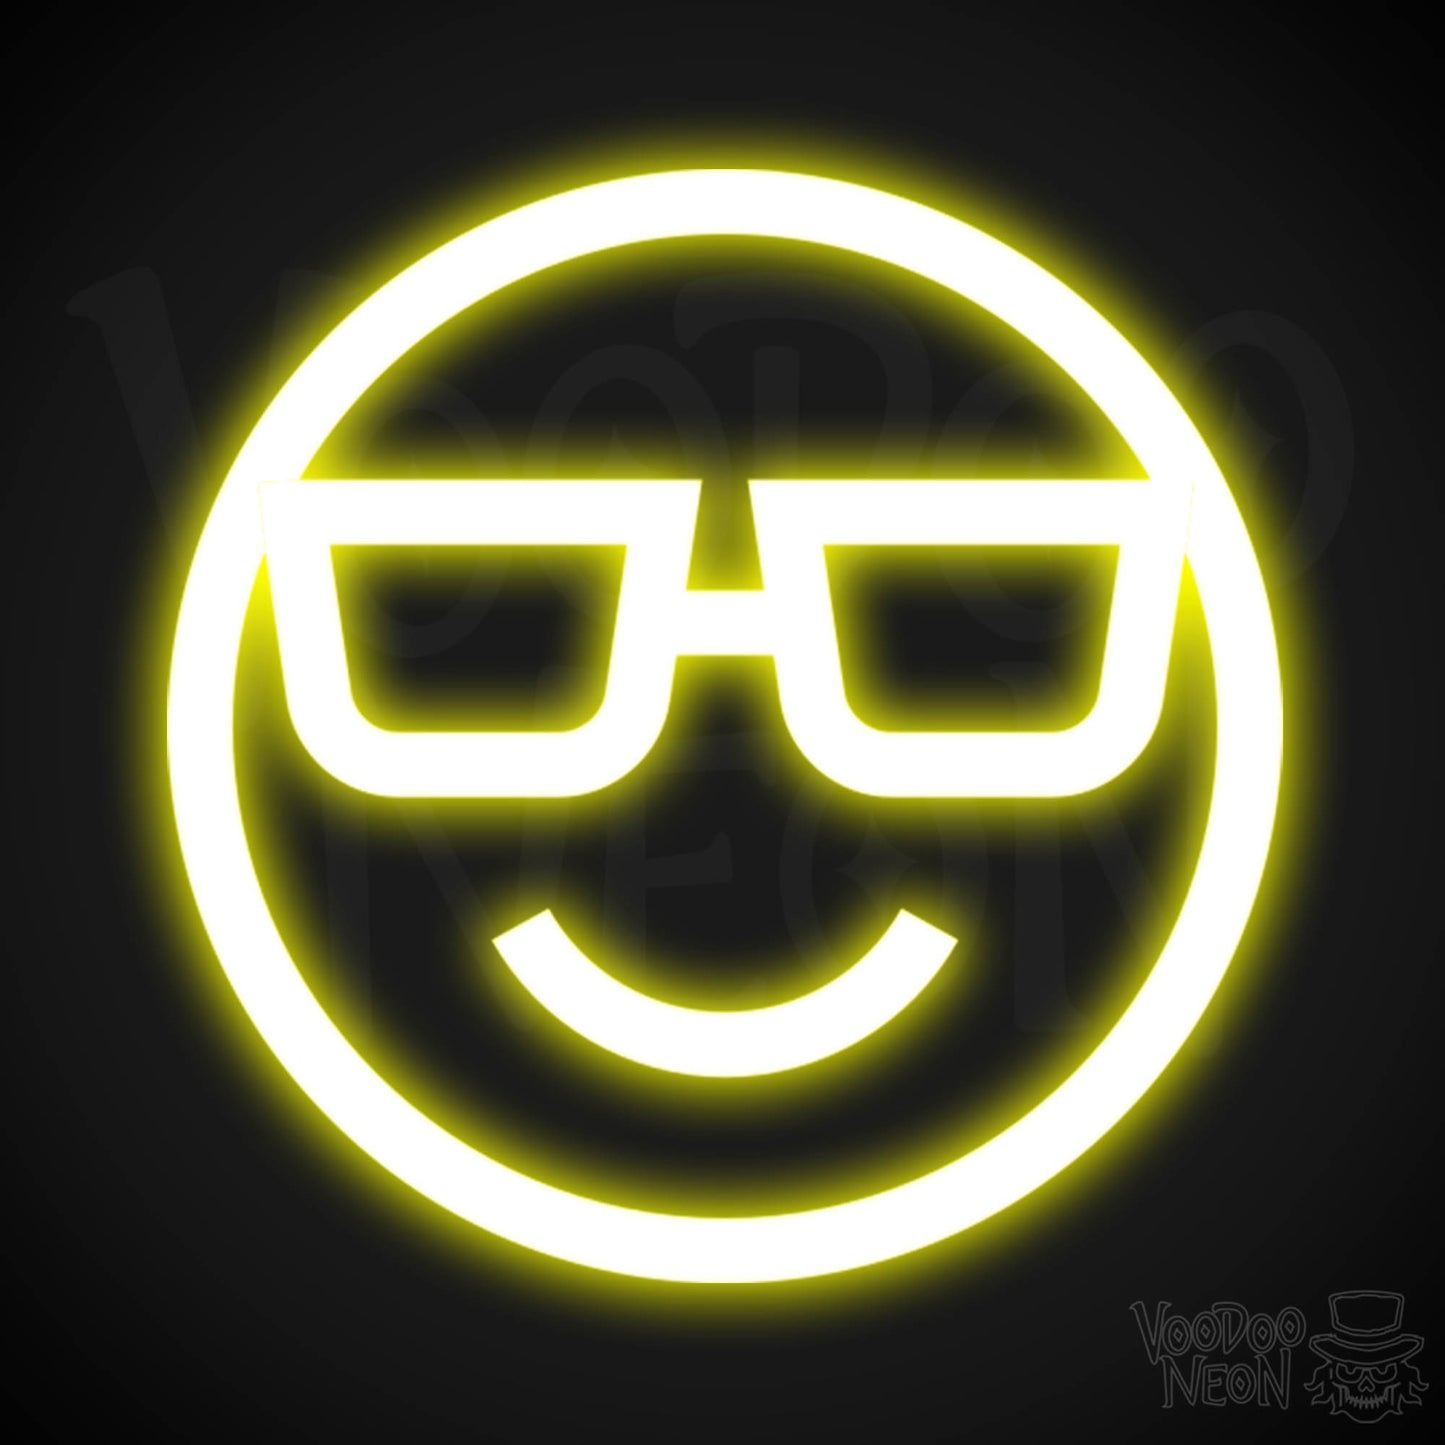 Neon Smiley Face - Smiley Face Neon Sign - LED Wall Art - Color Yellow